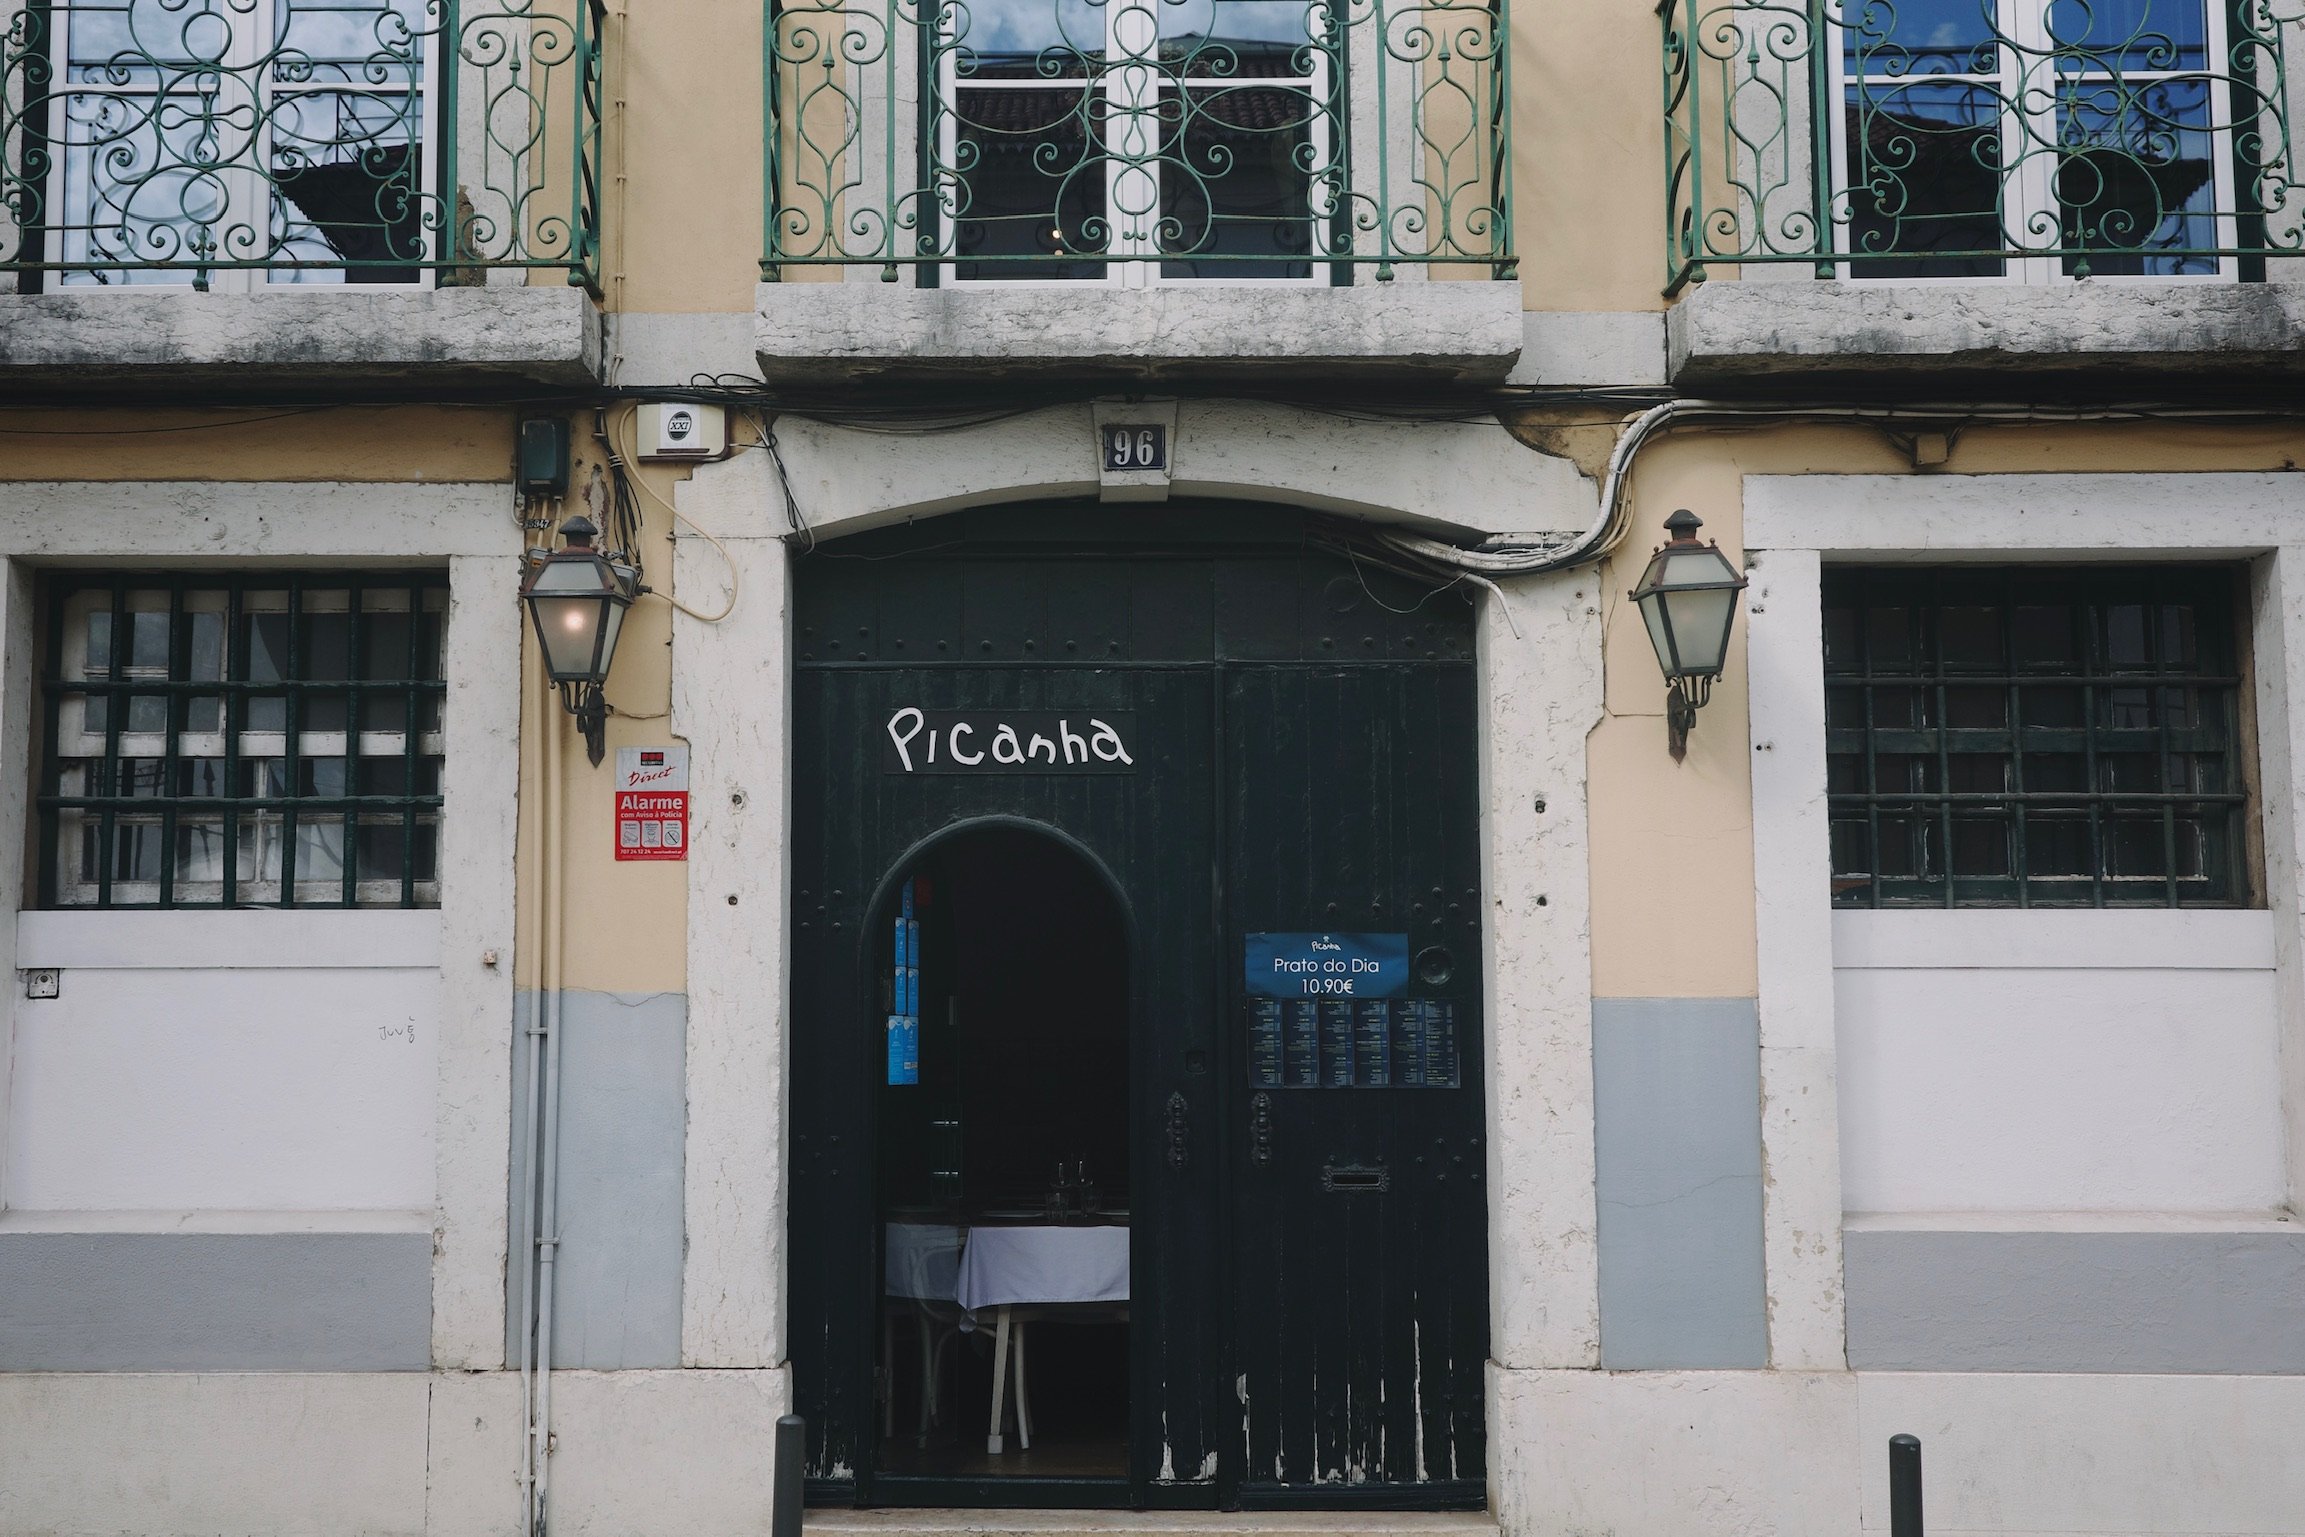 Shop from of Picanha a restaurant, featuring a dark green wide wooden door, with hand written sign. windows on the first floor featuring dark green rails.